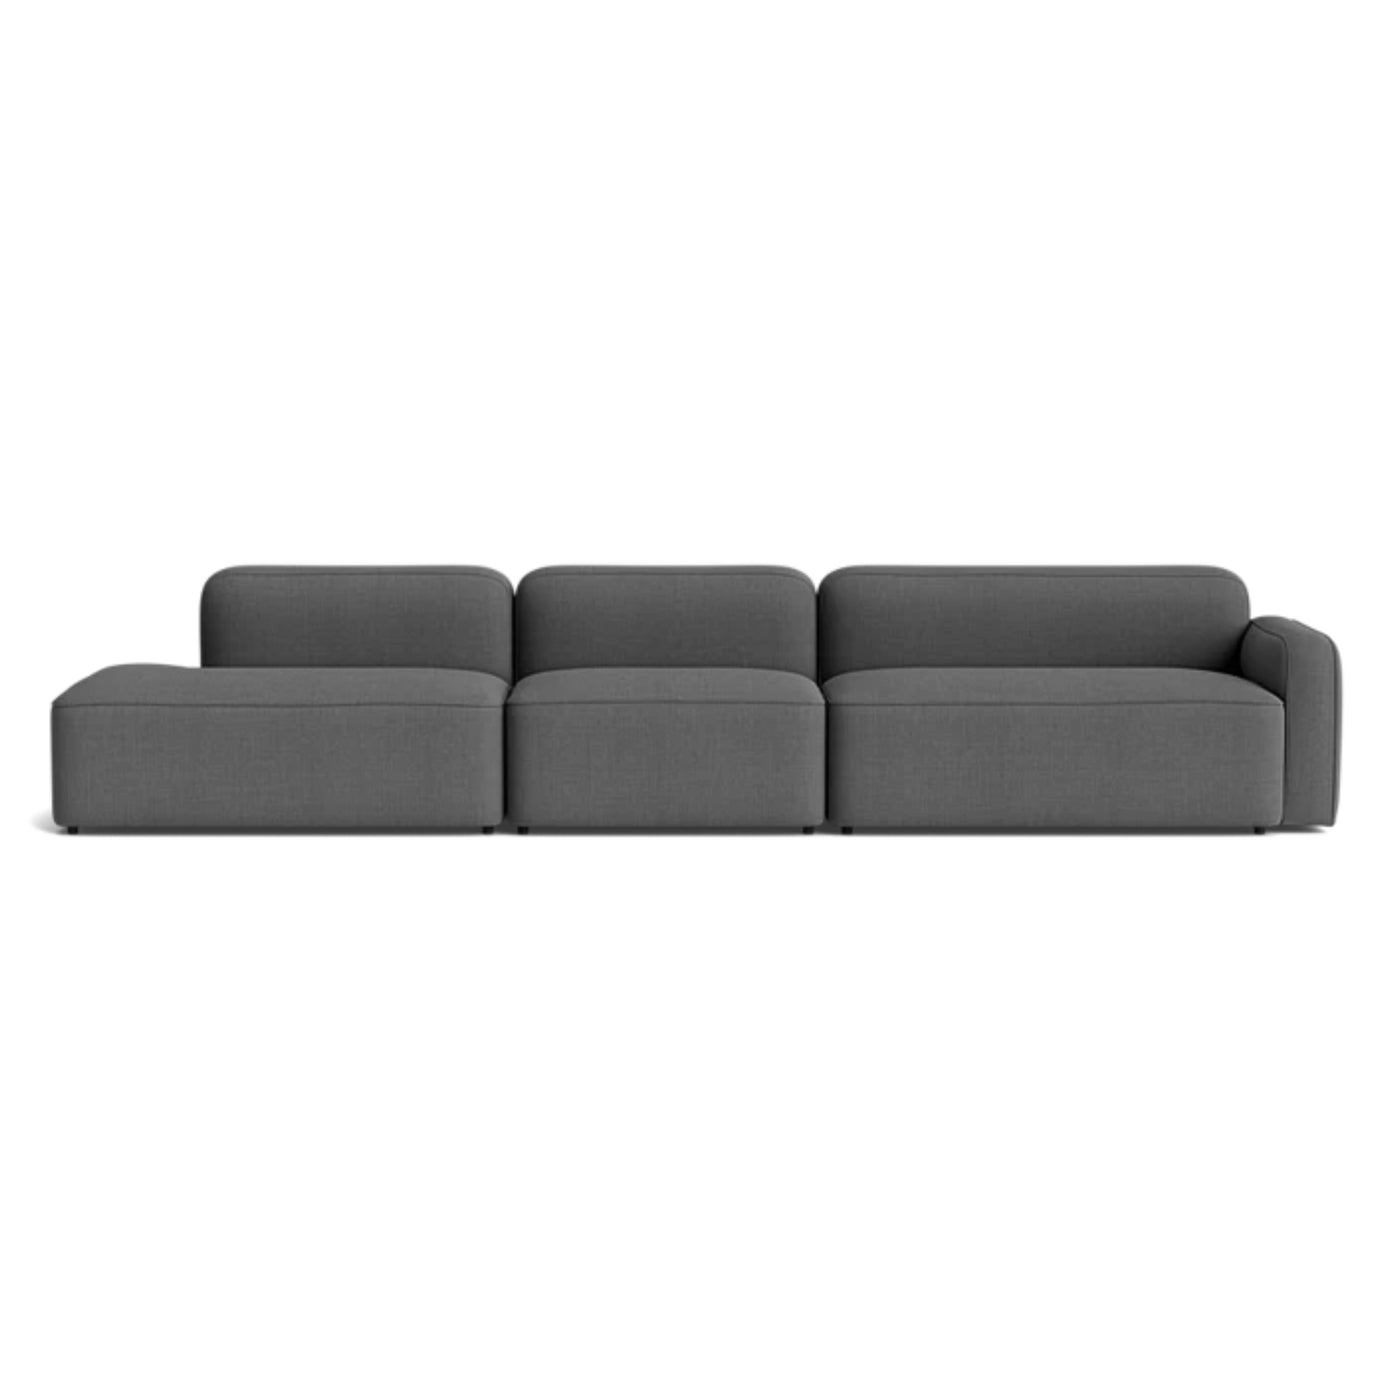 Normann Copenhagen Rope 3 Seater Modular Sofa. Made to order at someday designs. #colour_remix-163